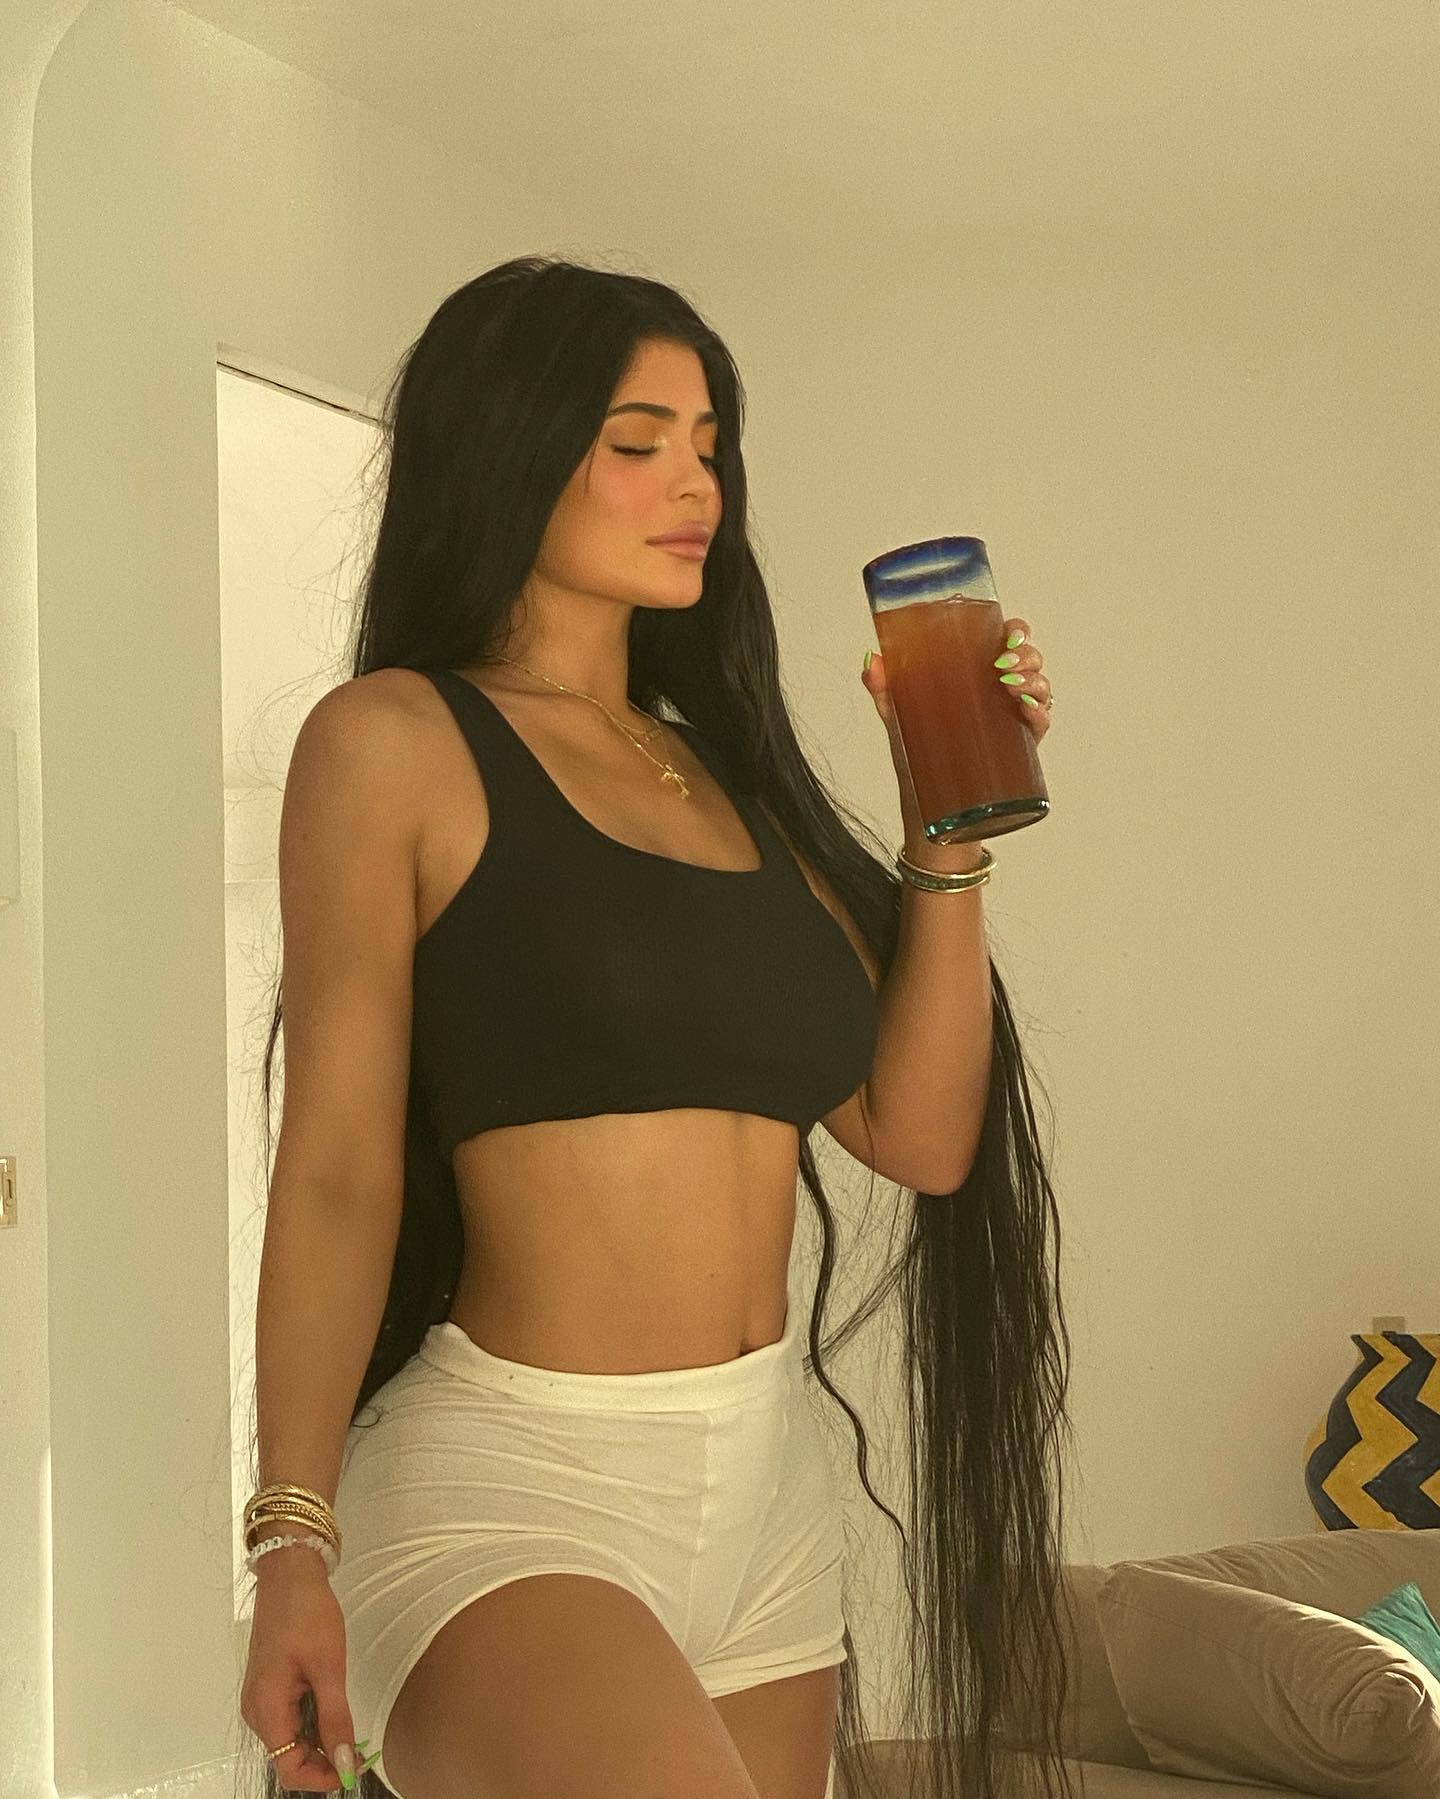 Photos n°11 : Kylie Jenner’s Shadow is Breaking the Internet!